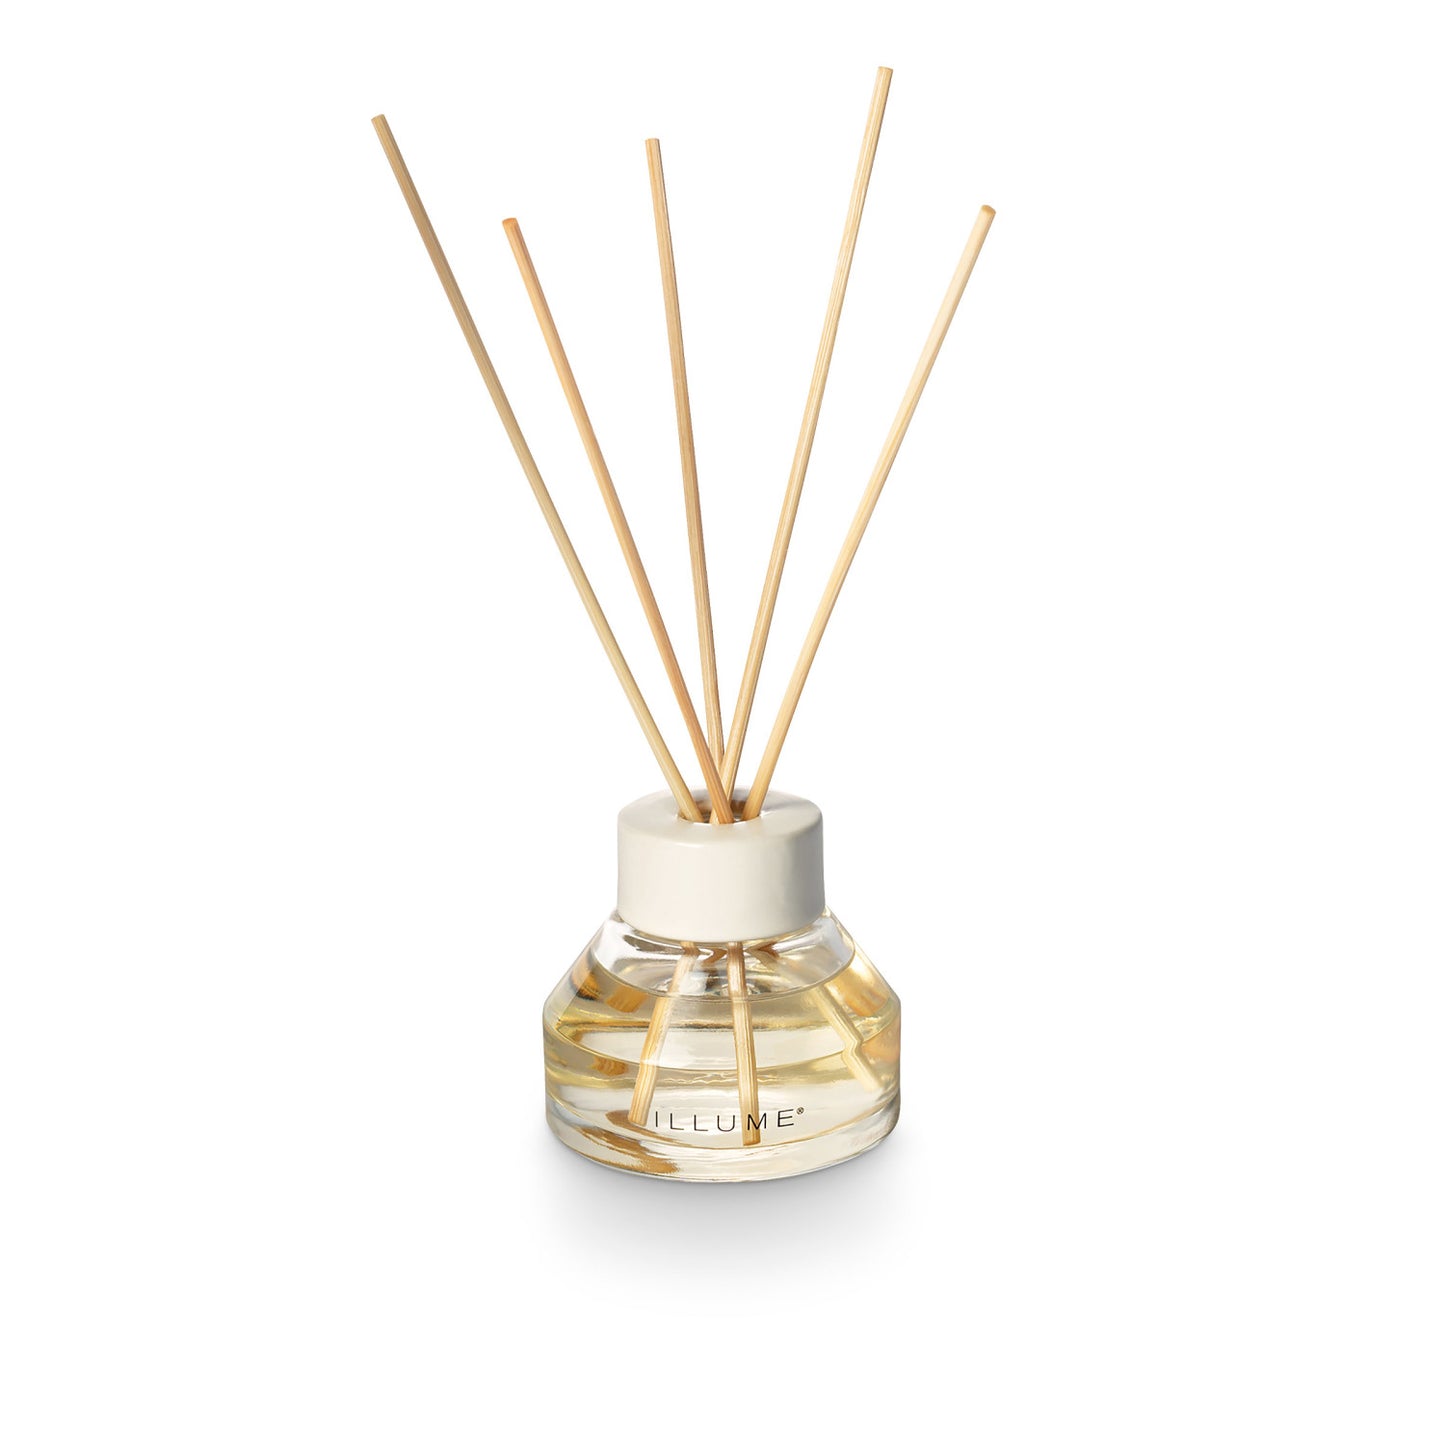 Woodfire Refillable Aromatic Diffuser